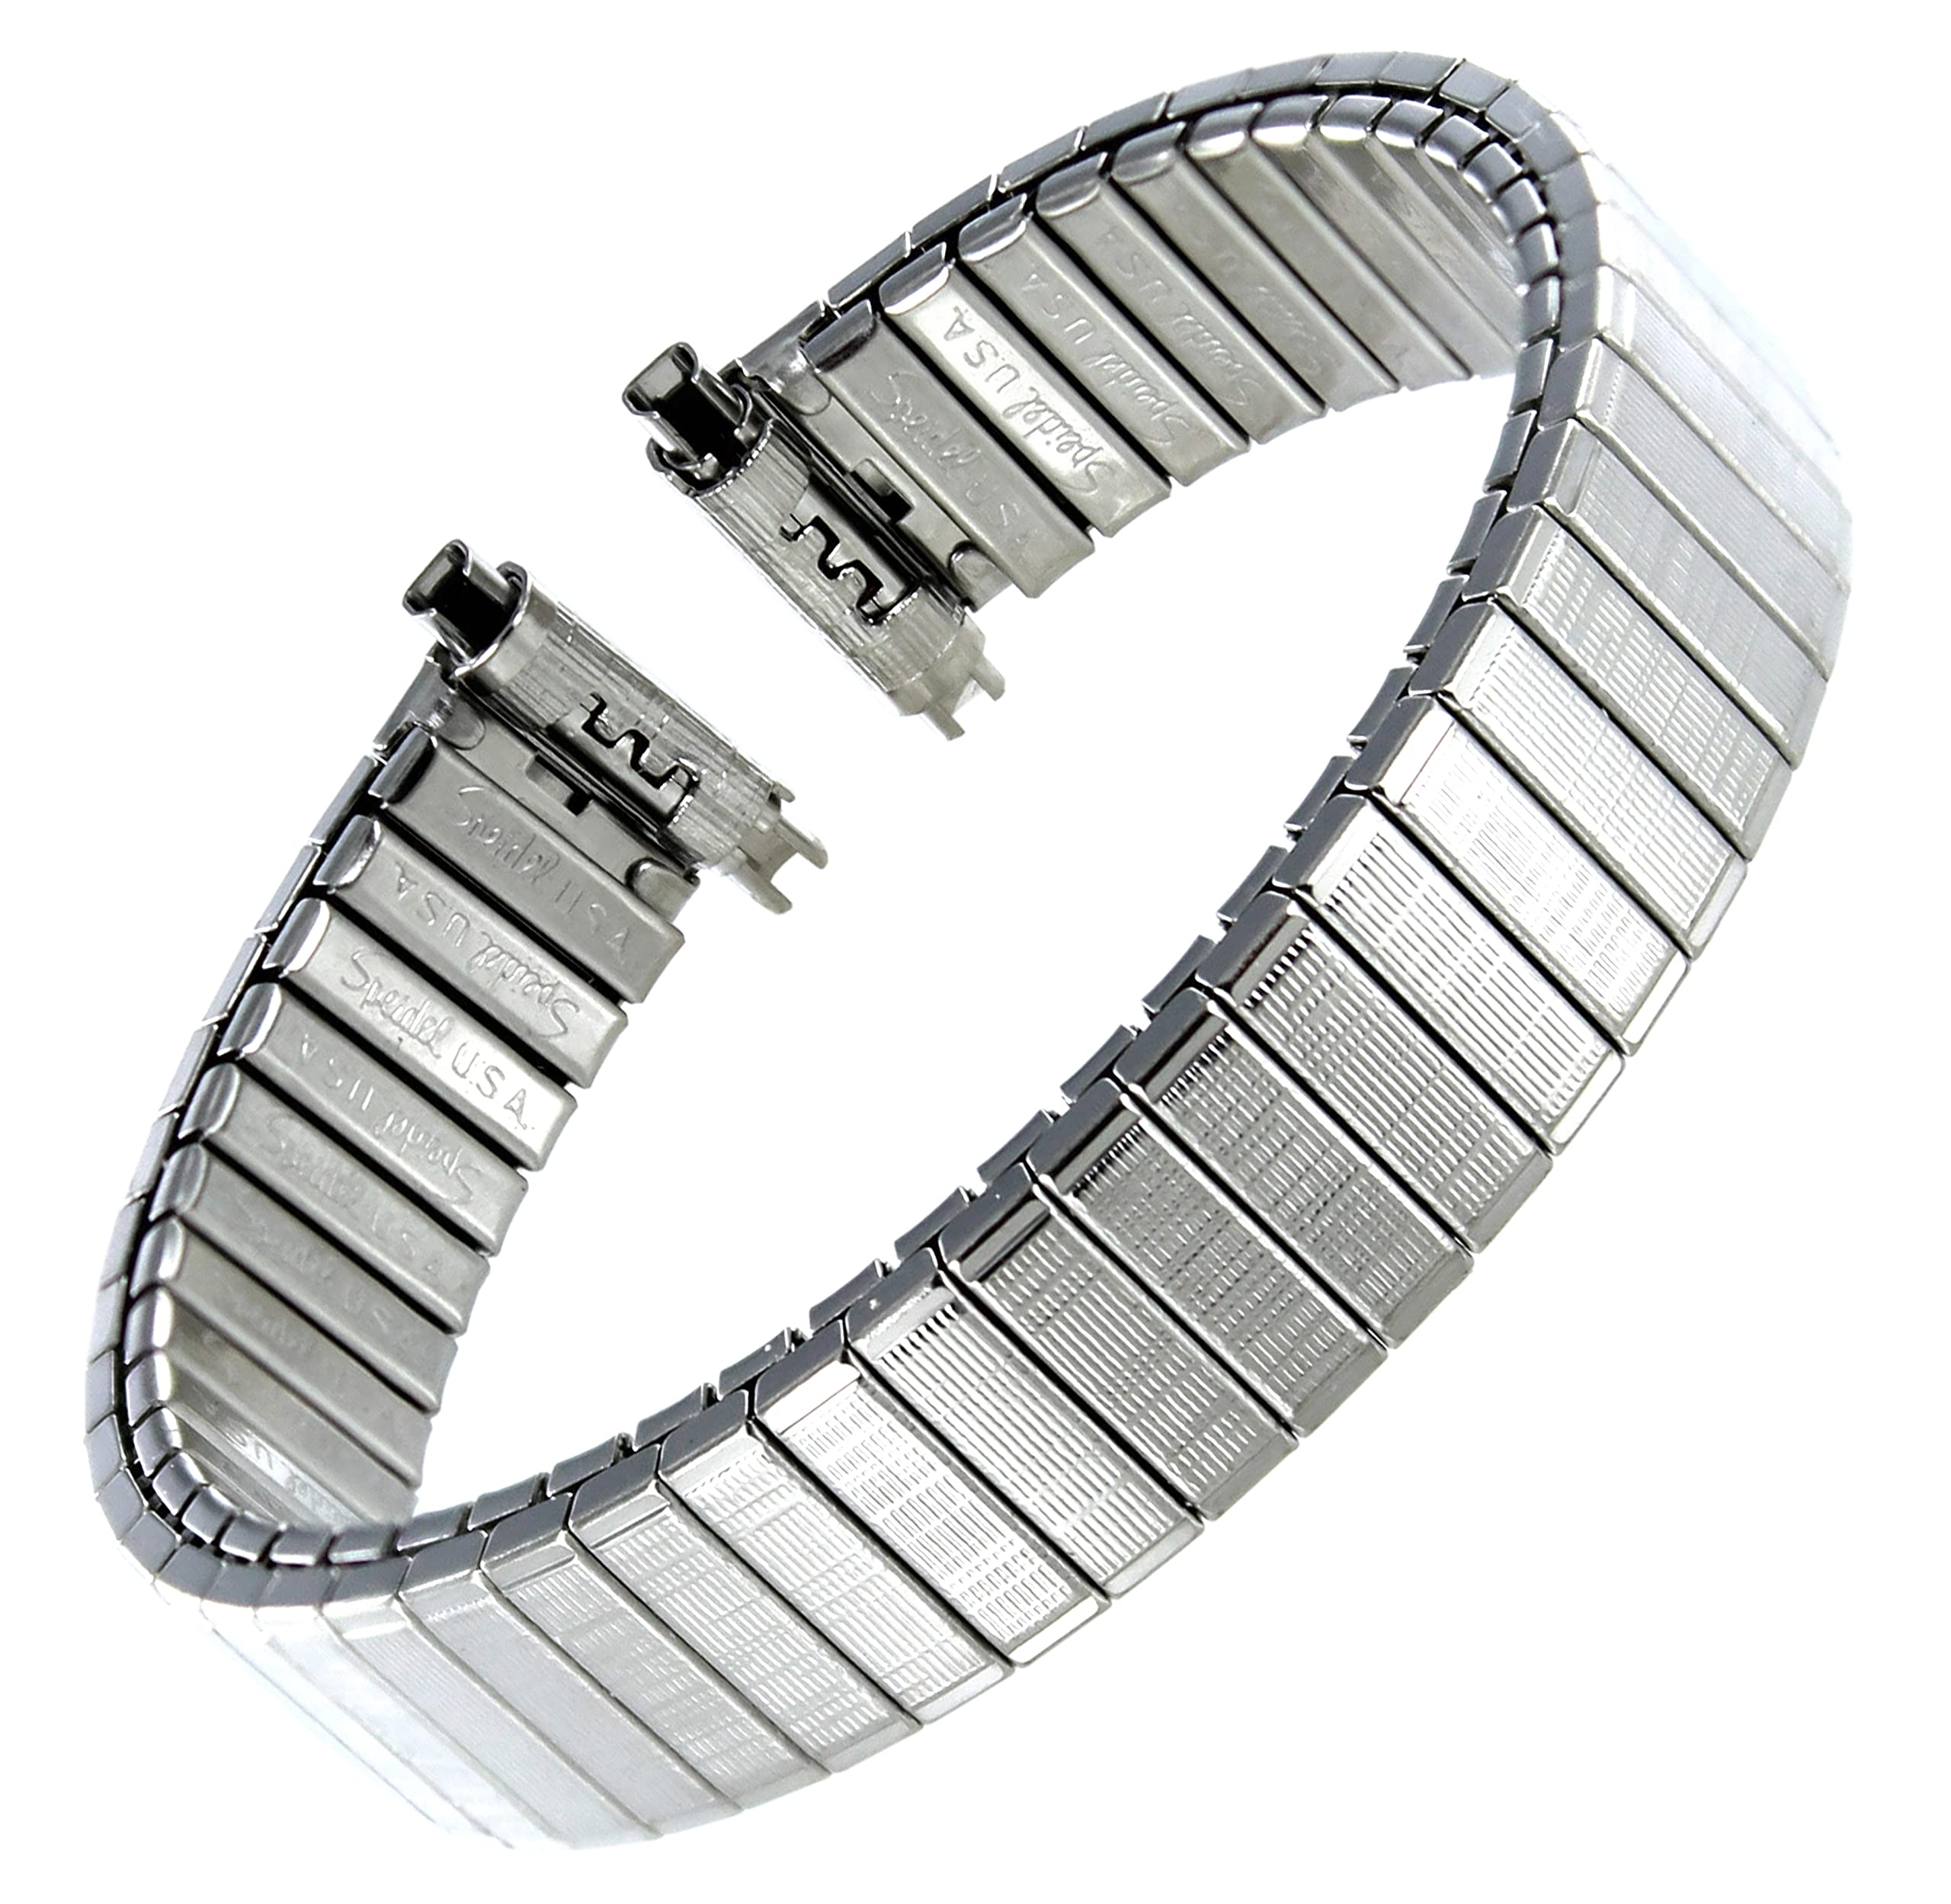 Speidel Express 9-13mm Long Stainless Steel Expansion Watch Band